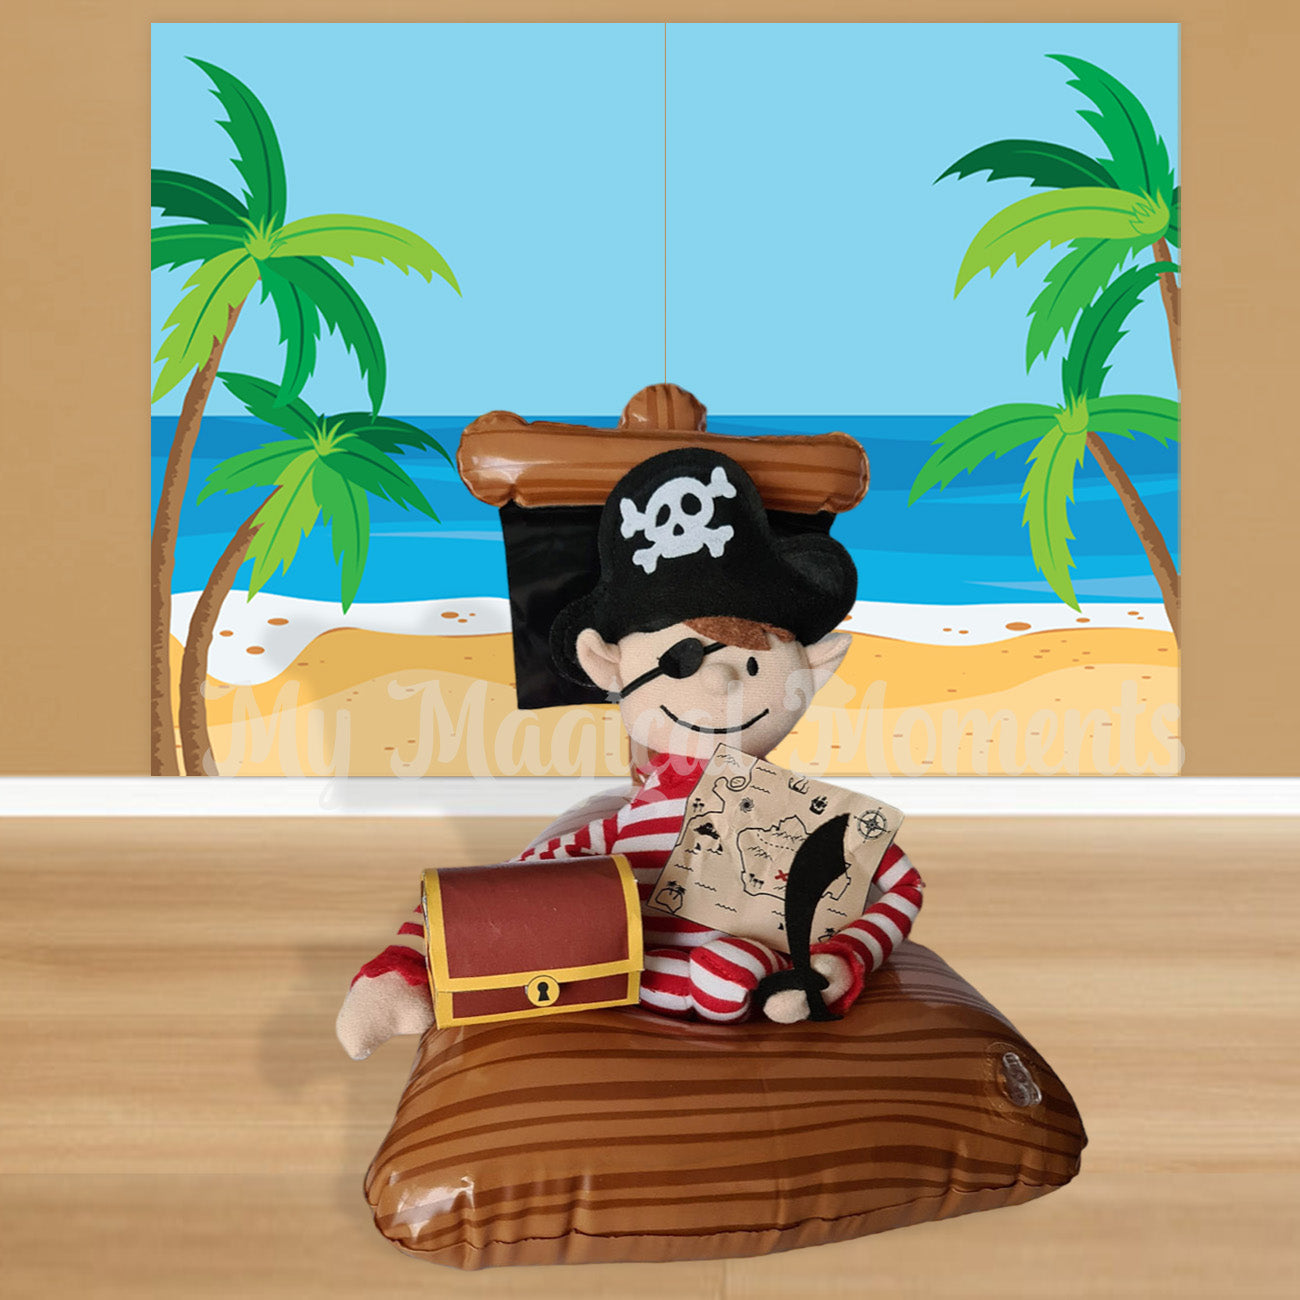 Elf For Christmas in an inflatable pirate ship with a printable map and treasure chest. Wearing a pirate costume